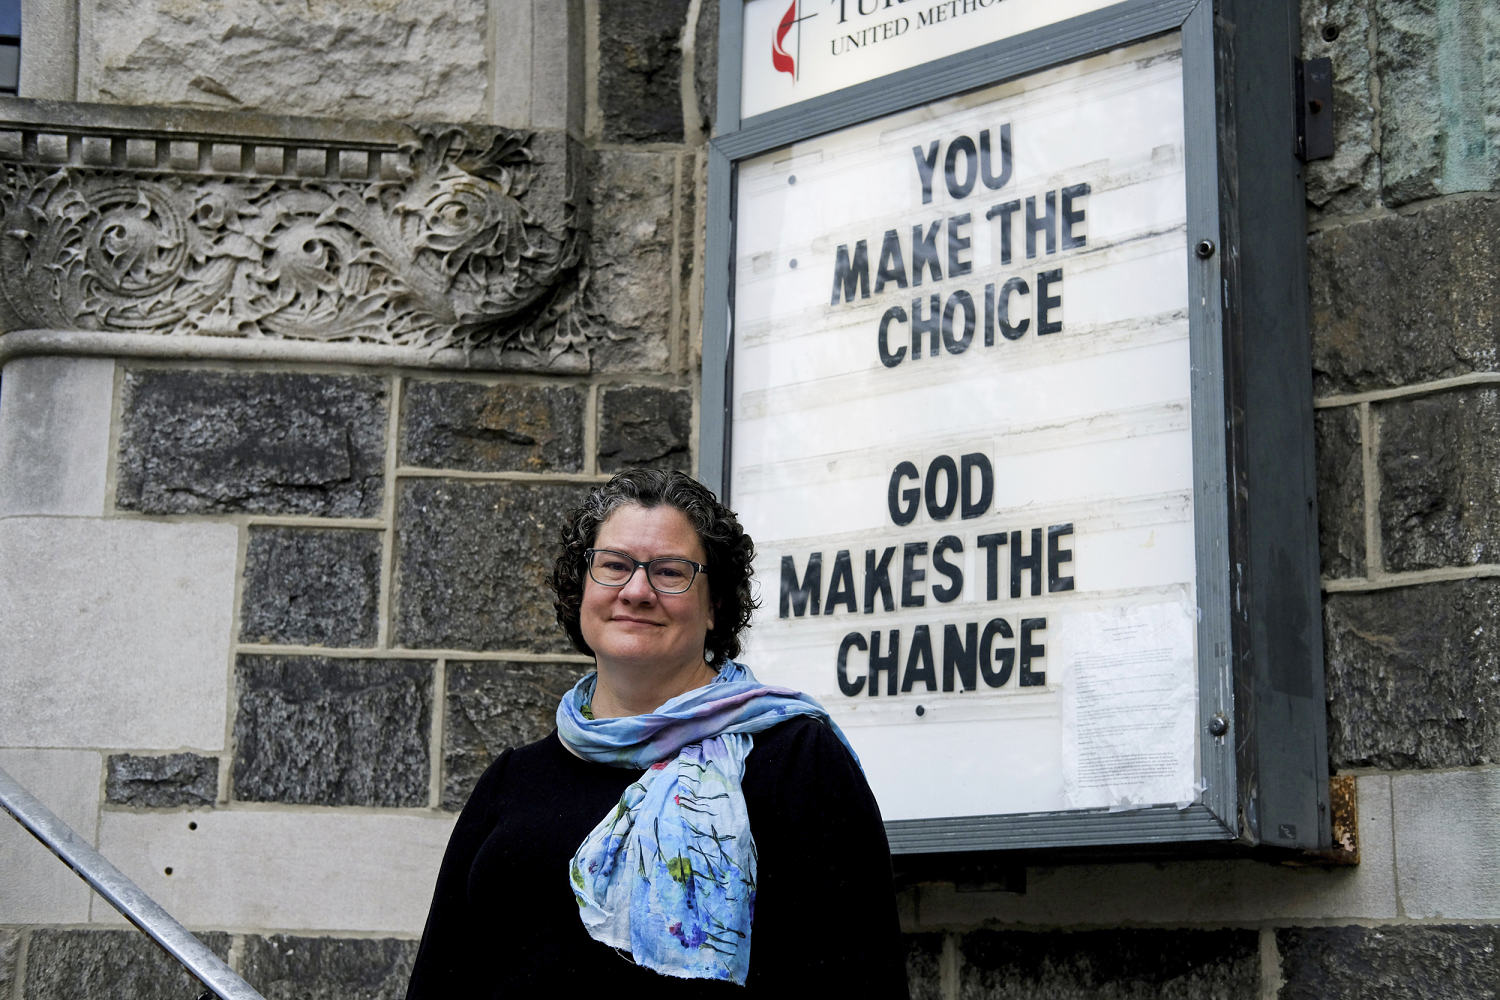 United Methodists scrap their anti-gay bans. A pastor who defied them seeks reinstatement.